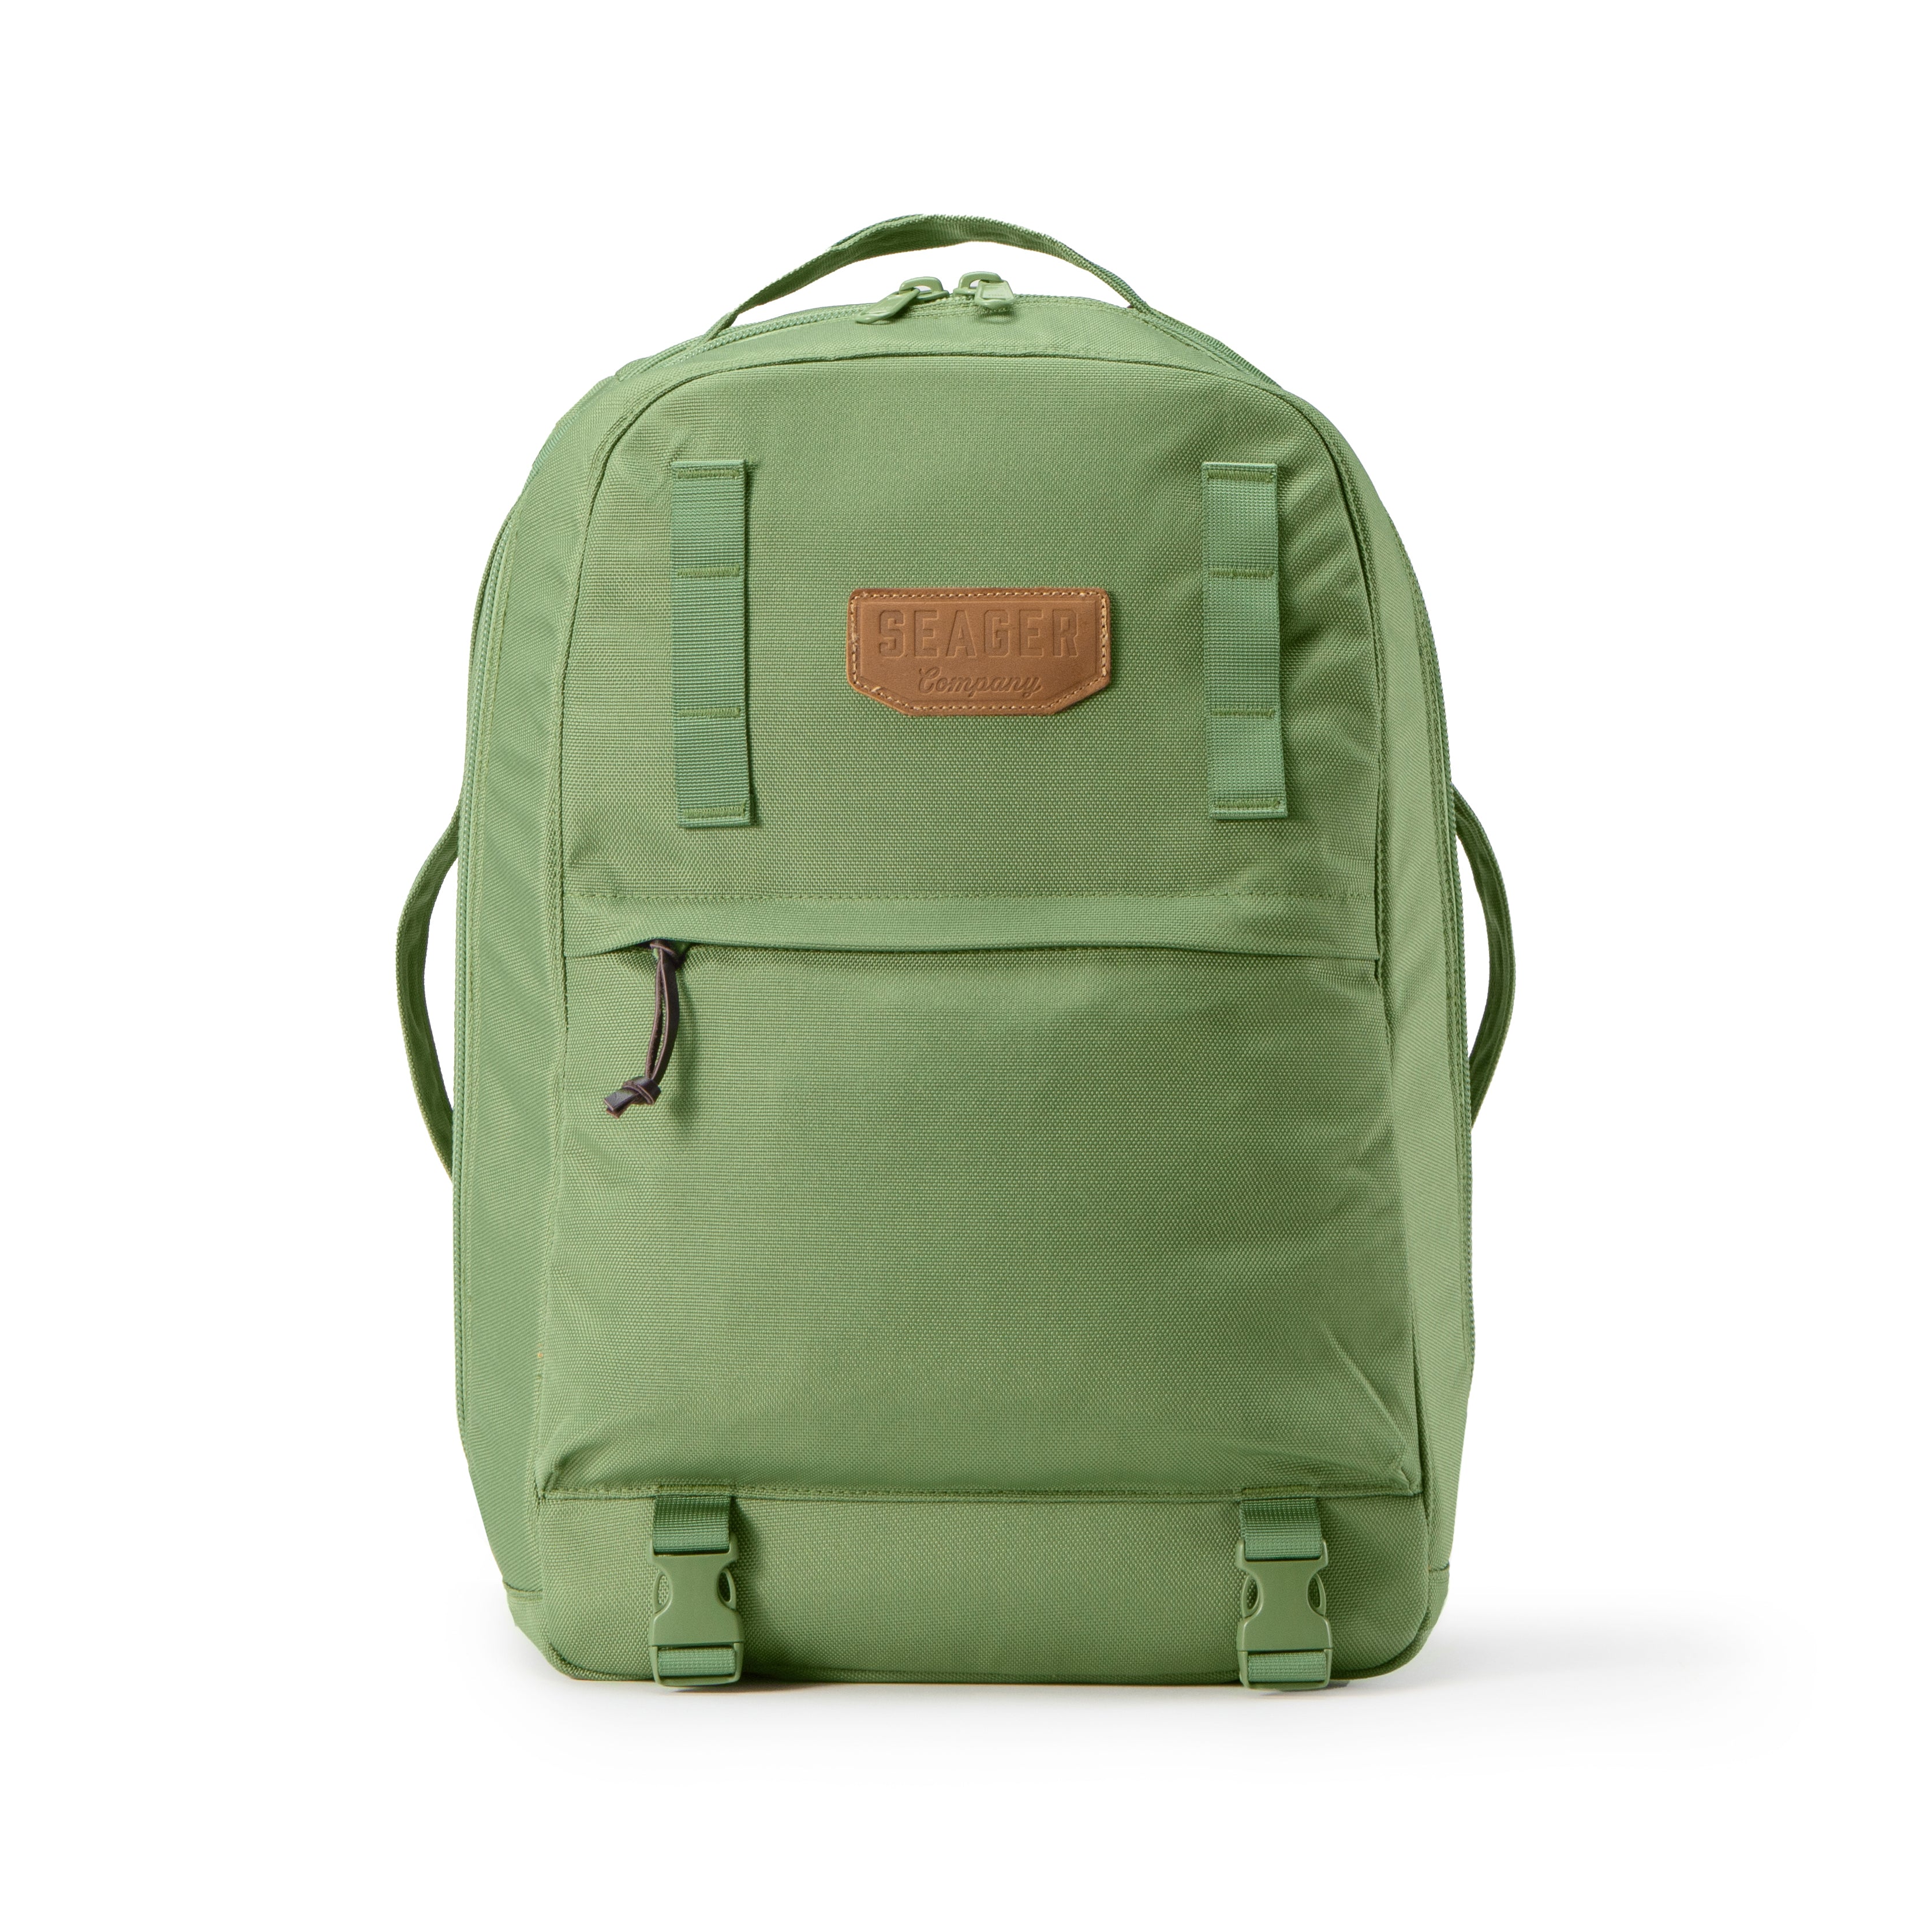 BIGMOUTH 26L BACKPACK